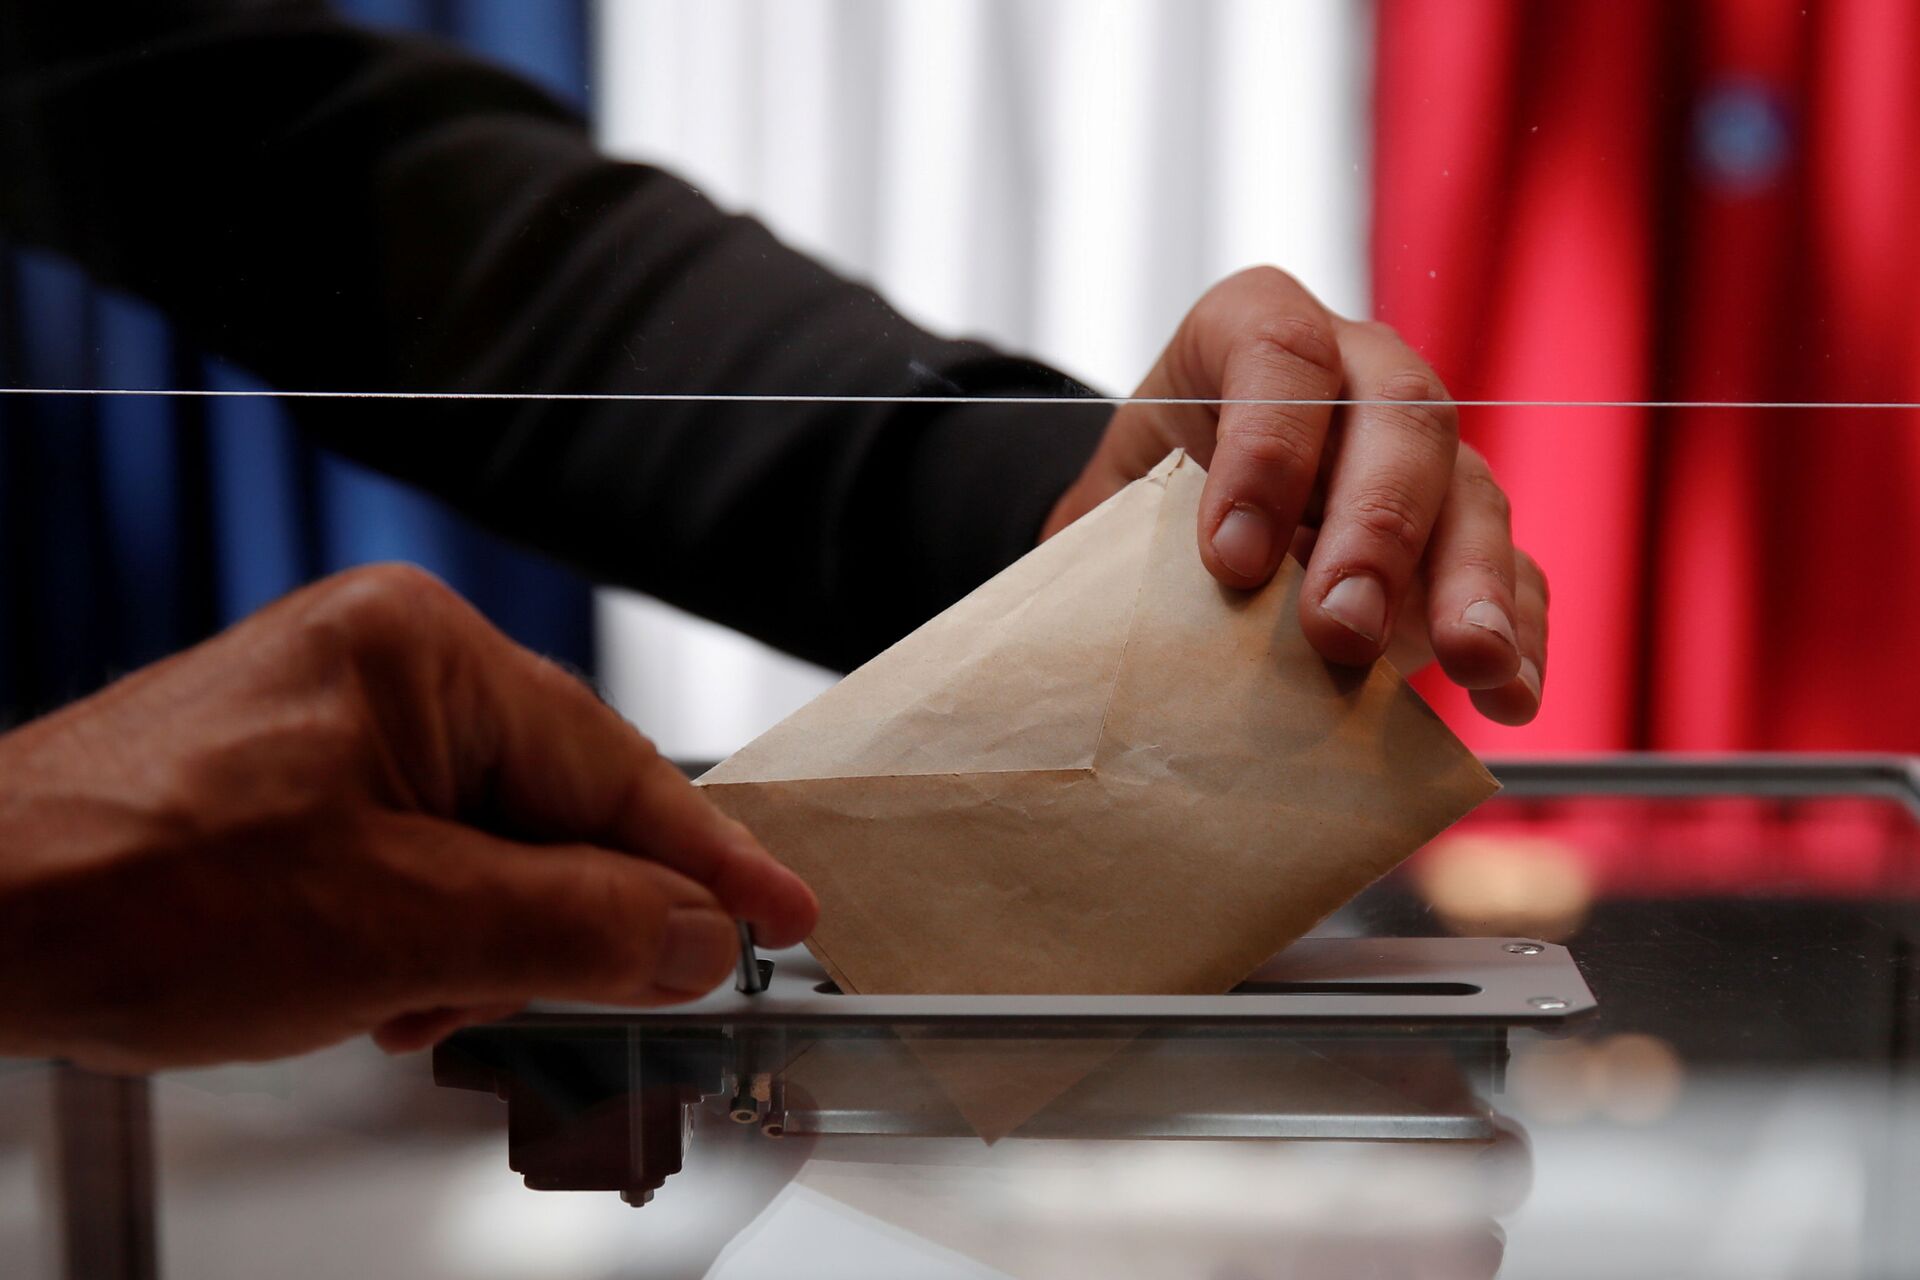 French Lower House to Examine Reasons Behind Low Turnout in Regional Elections - Sputnik International, 1920, 29.06.2021